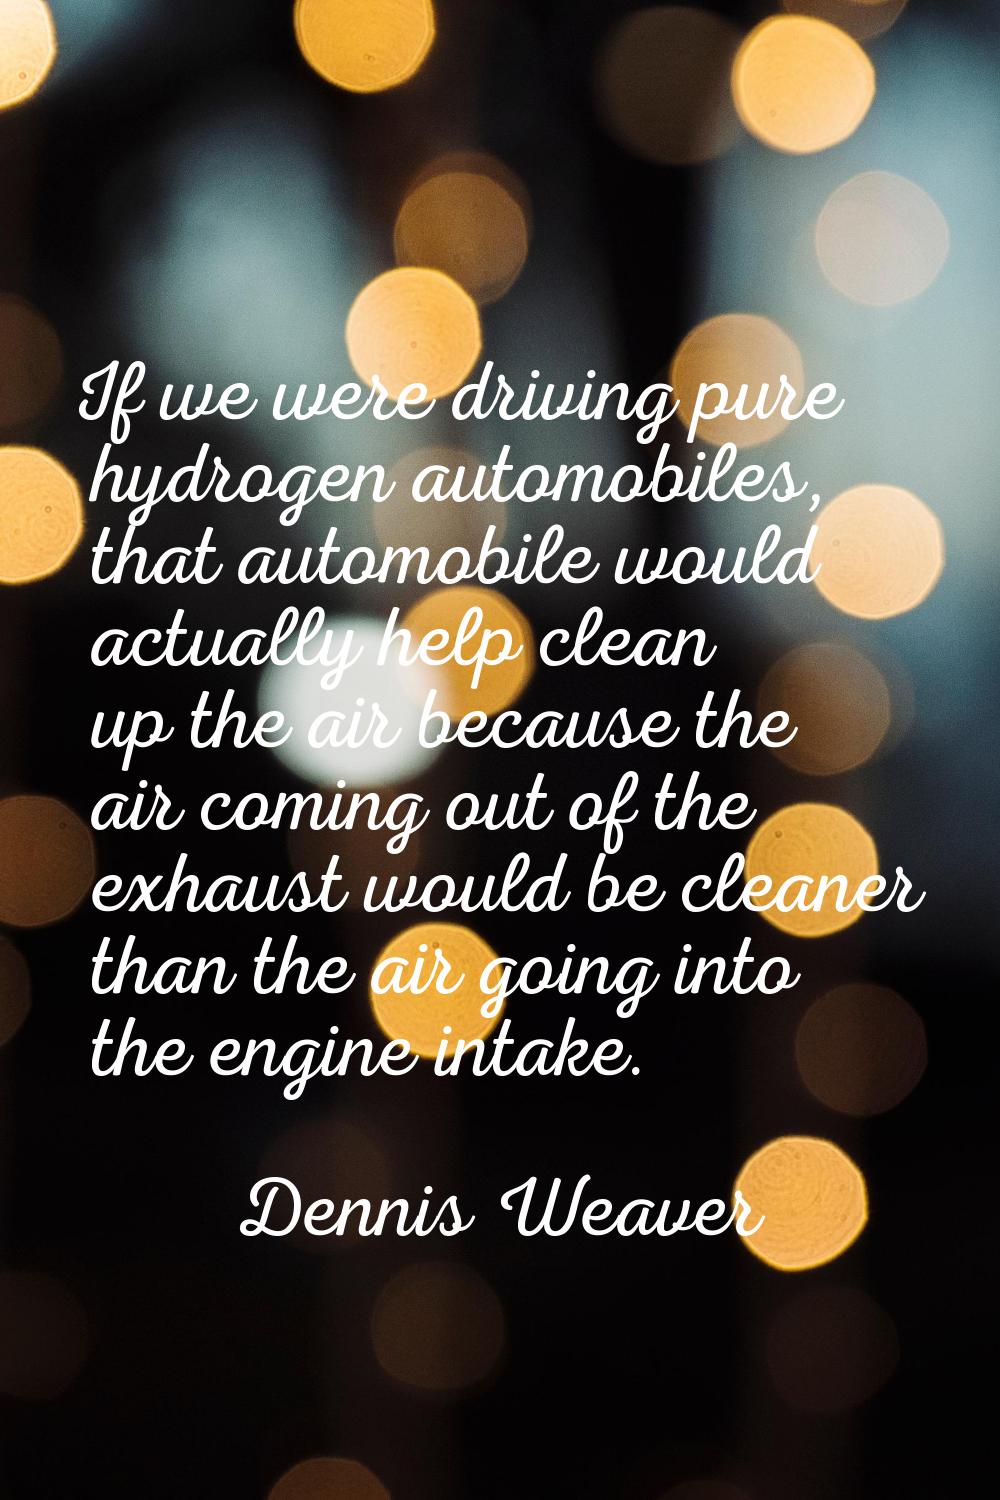 If we were driving pure hydrogen automobiles, that automobile would actually help clean up the air 